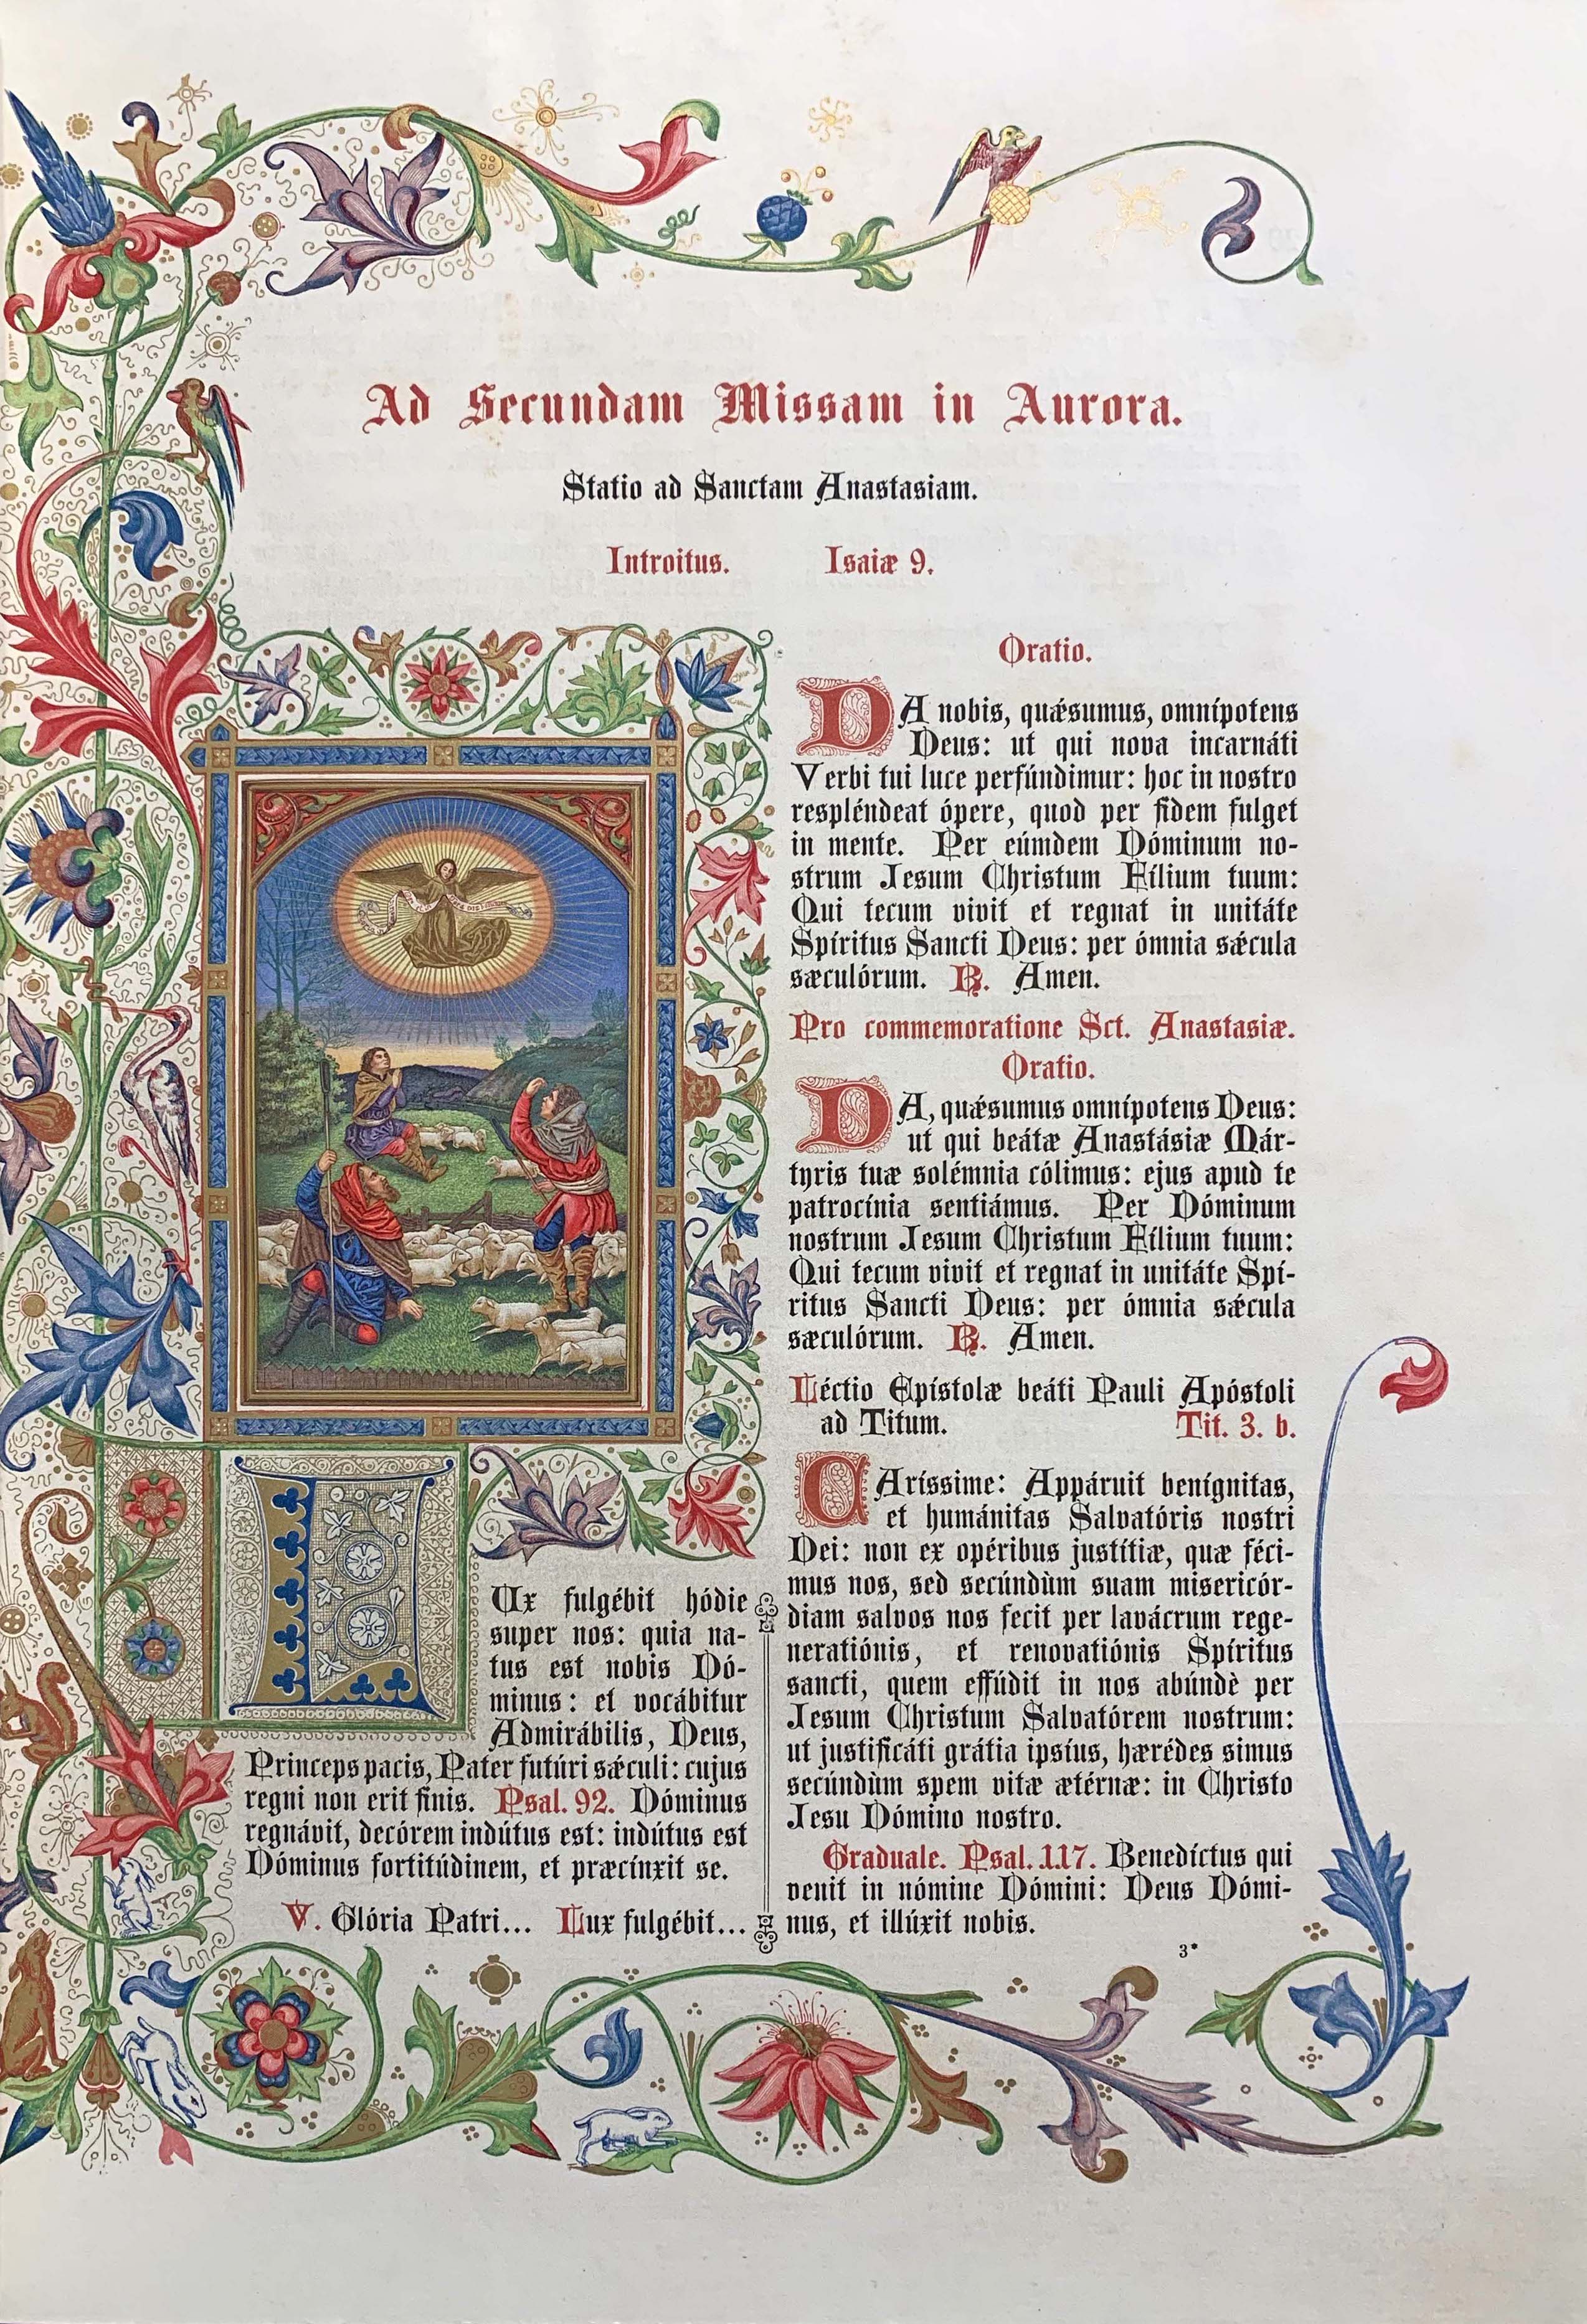 image of a page of an incunabula